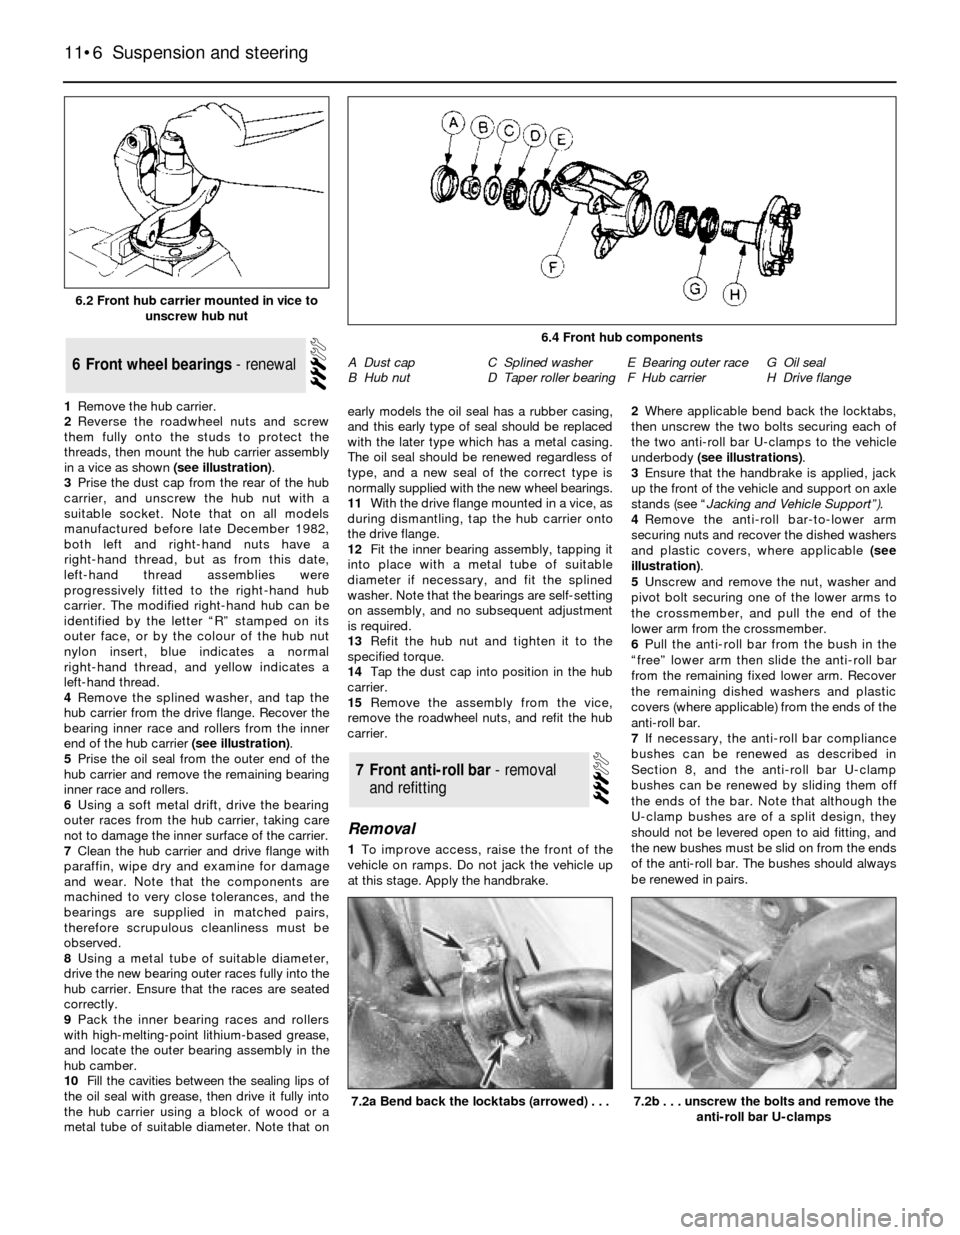 FORD SIERRA 1984 1.G Suspension And Steering Workshop Manual 1Remove the hub carrier.
2Reverse the roadwheel nuts and screw
them fully onto the studs to protect the
threads, then mount the hub carrier assembly
in a vice as shown (see illustration).
3Prise the d